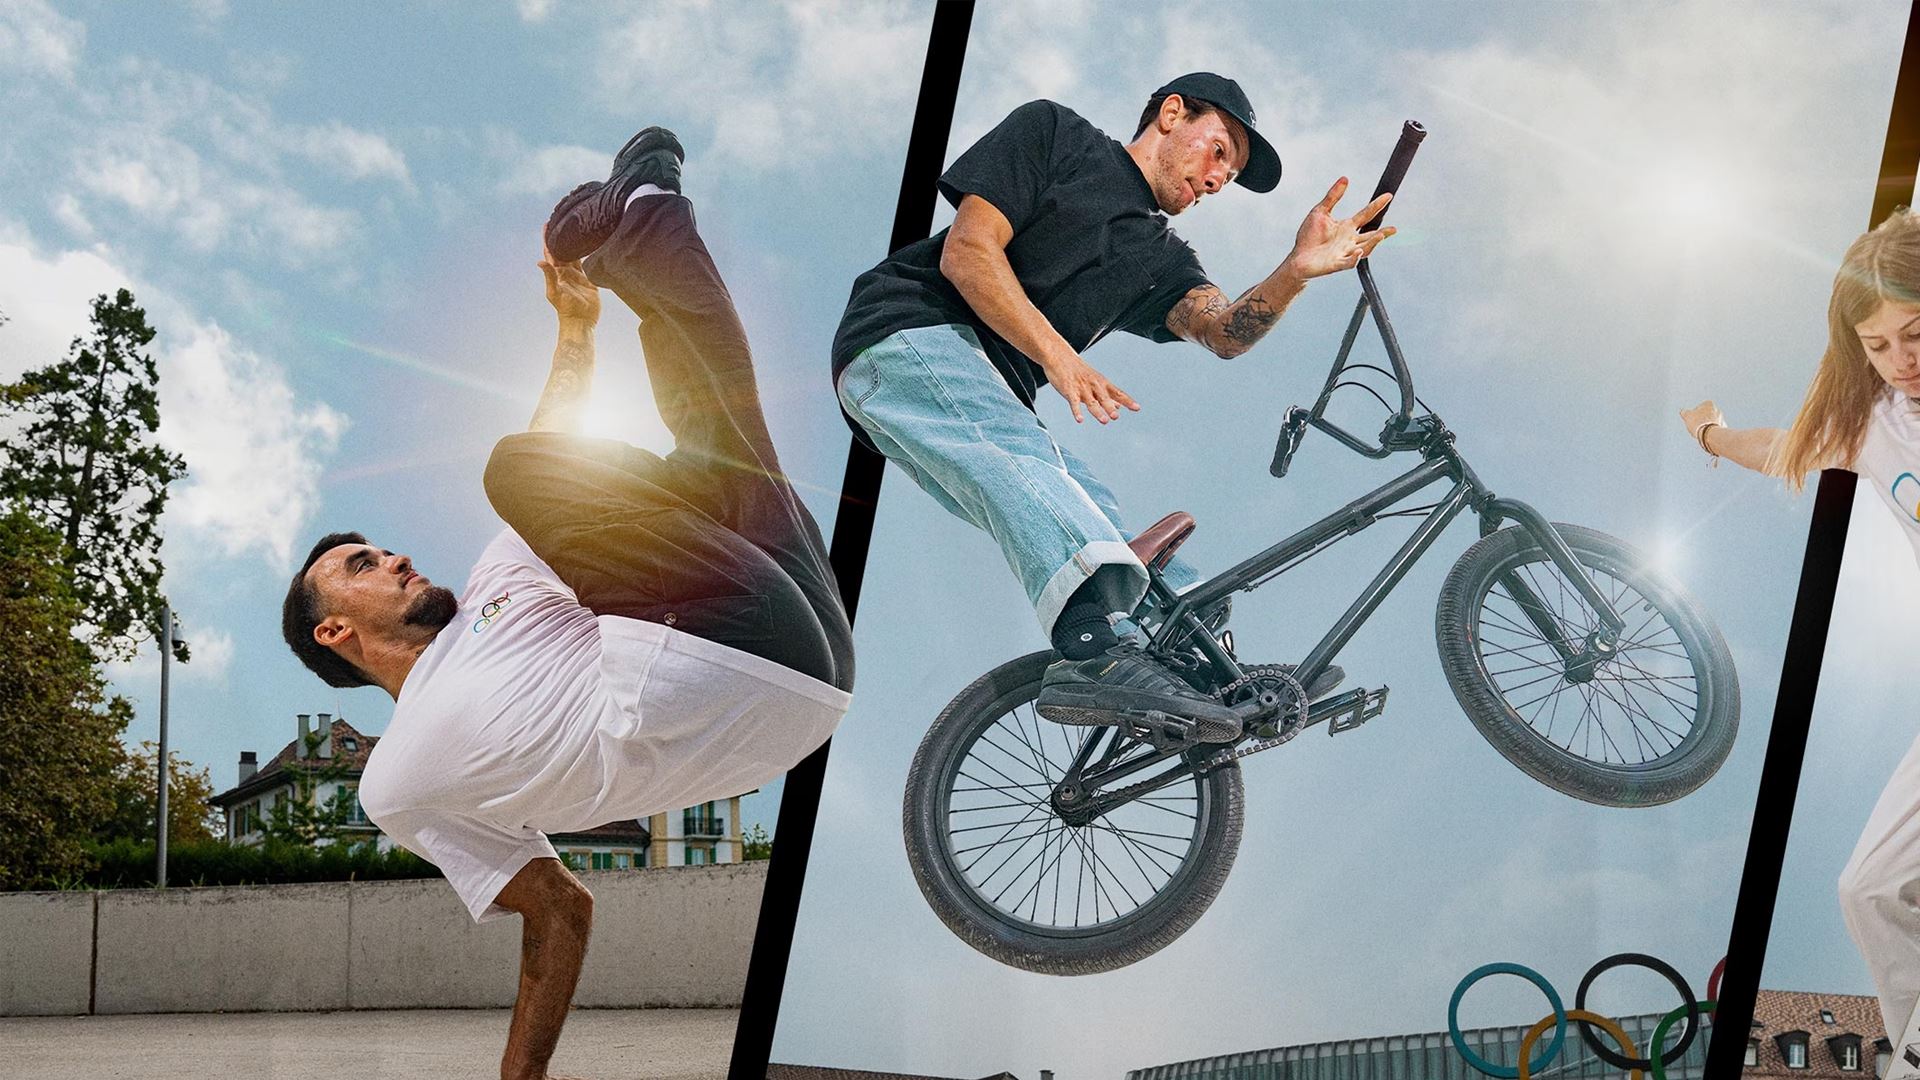 Let’s Move: IOC invites breakers, BMX riders and skaters to show the ...